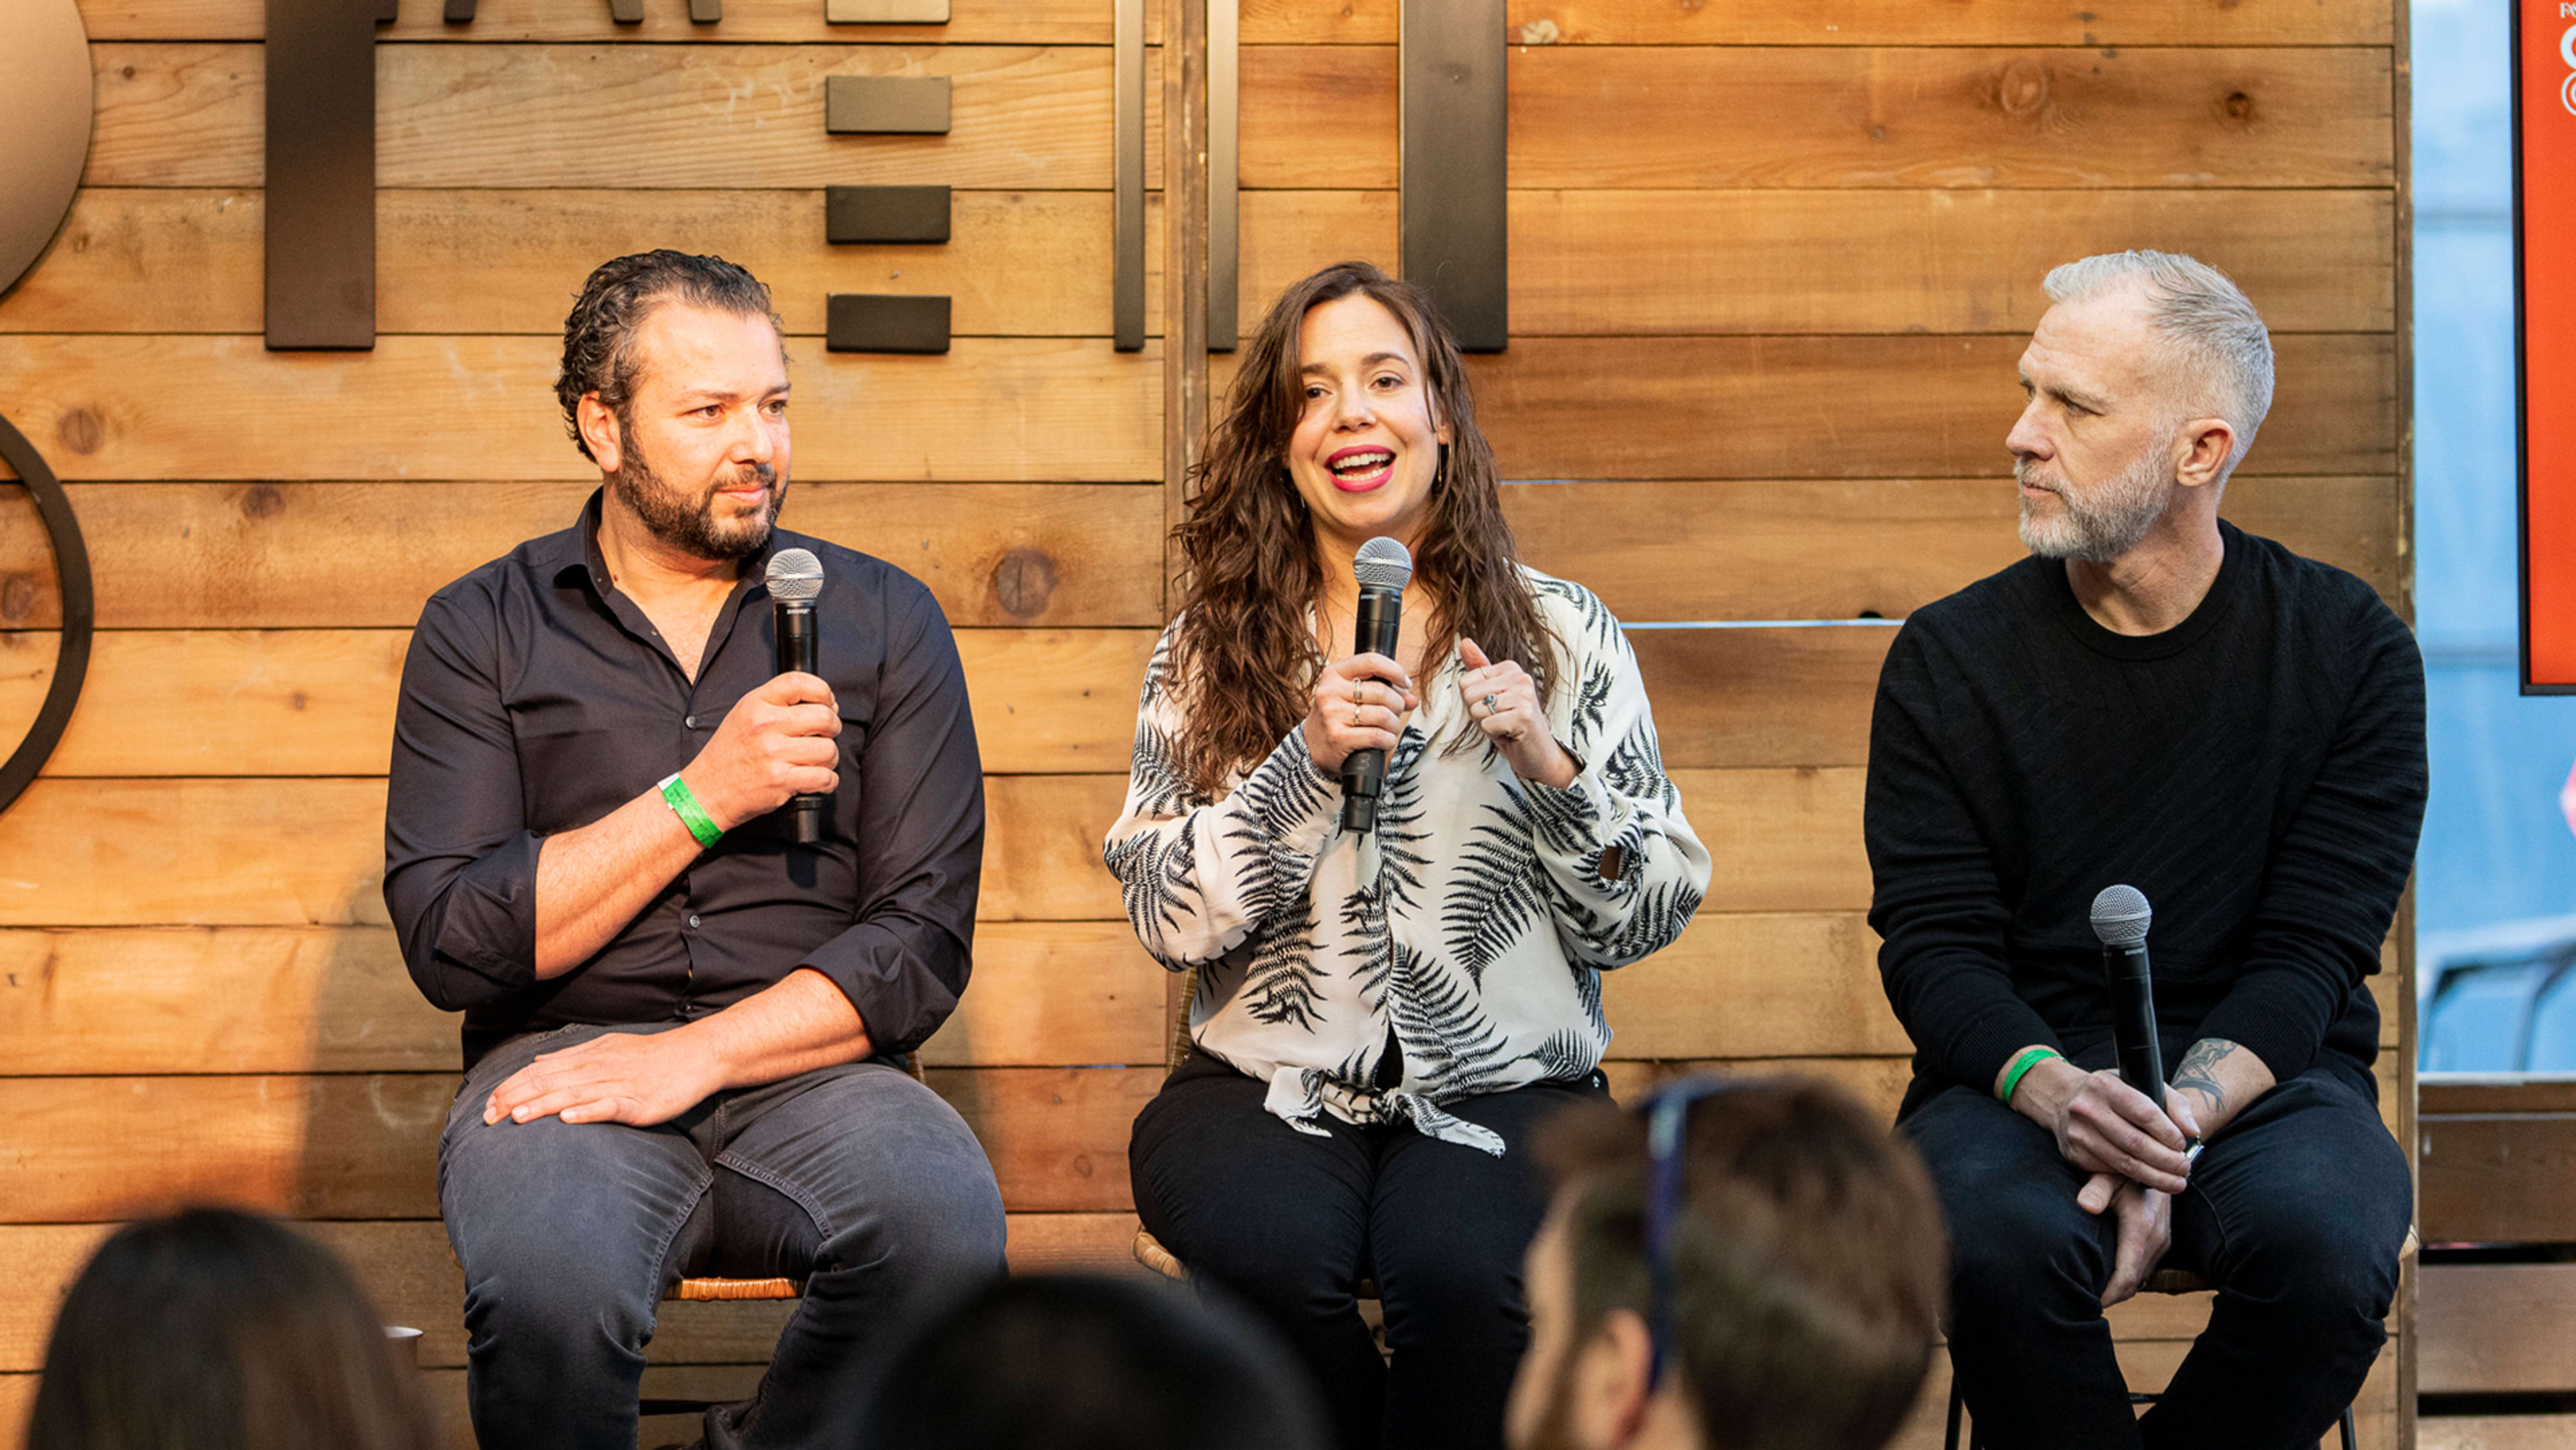 Tech leaders from Vimeo, Slack, and 776 share insights on staying innovative during an economic downturn